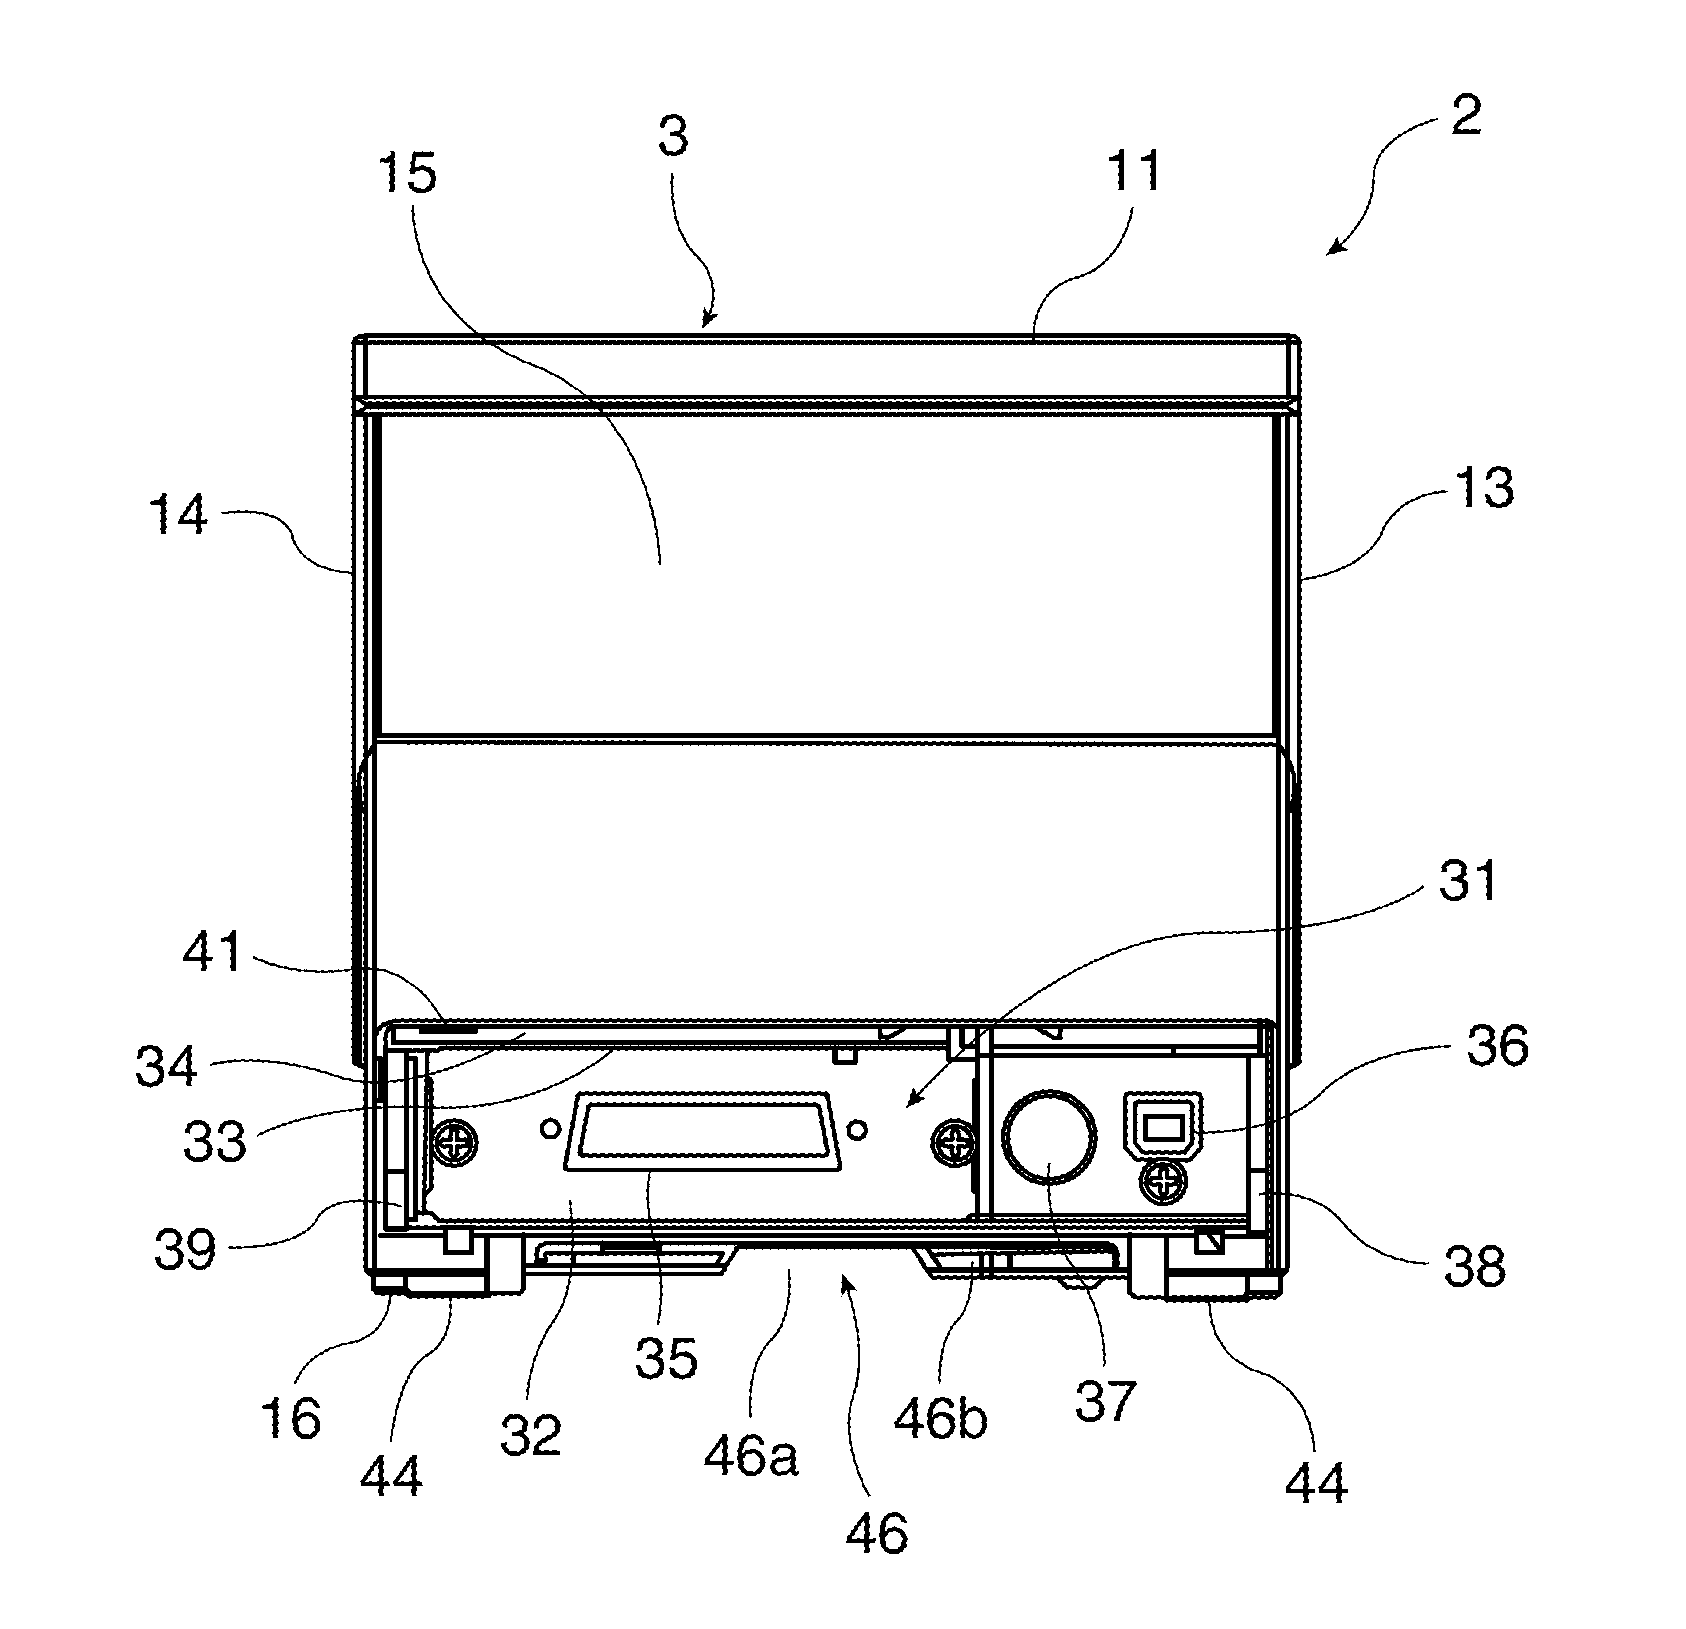 AC adapter unit, storage tray for an AC adapter and electronic device